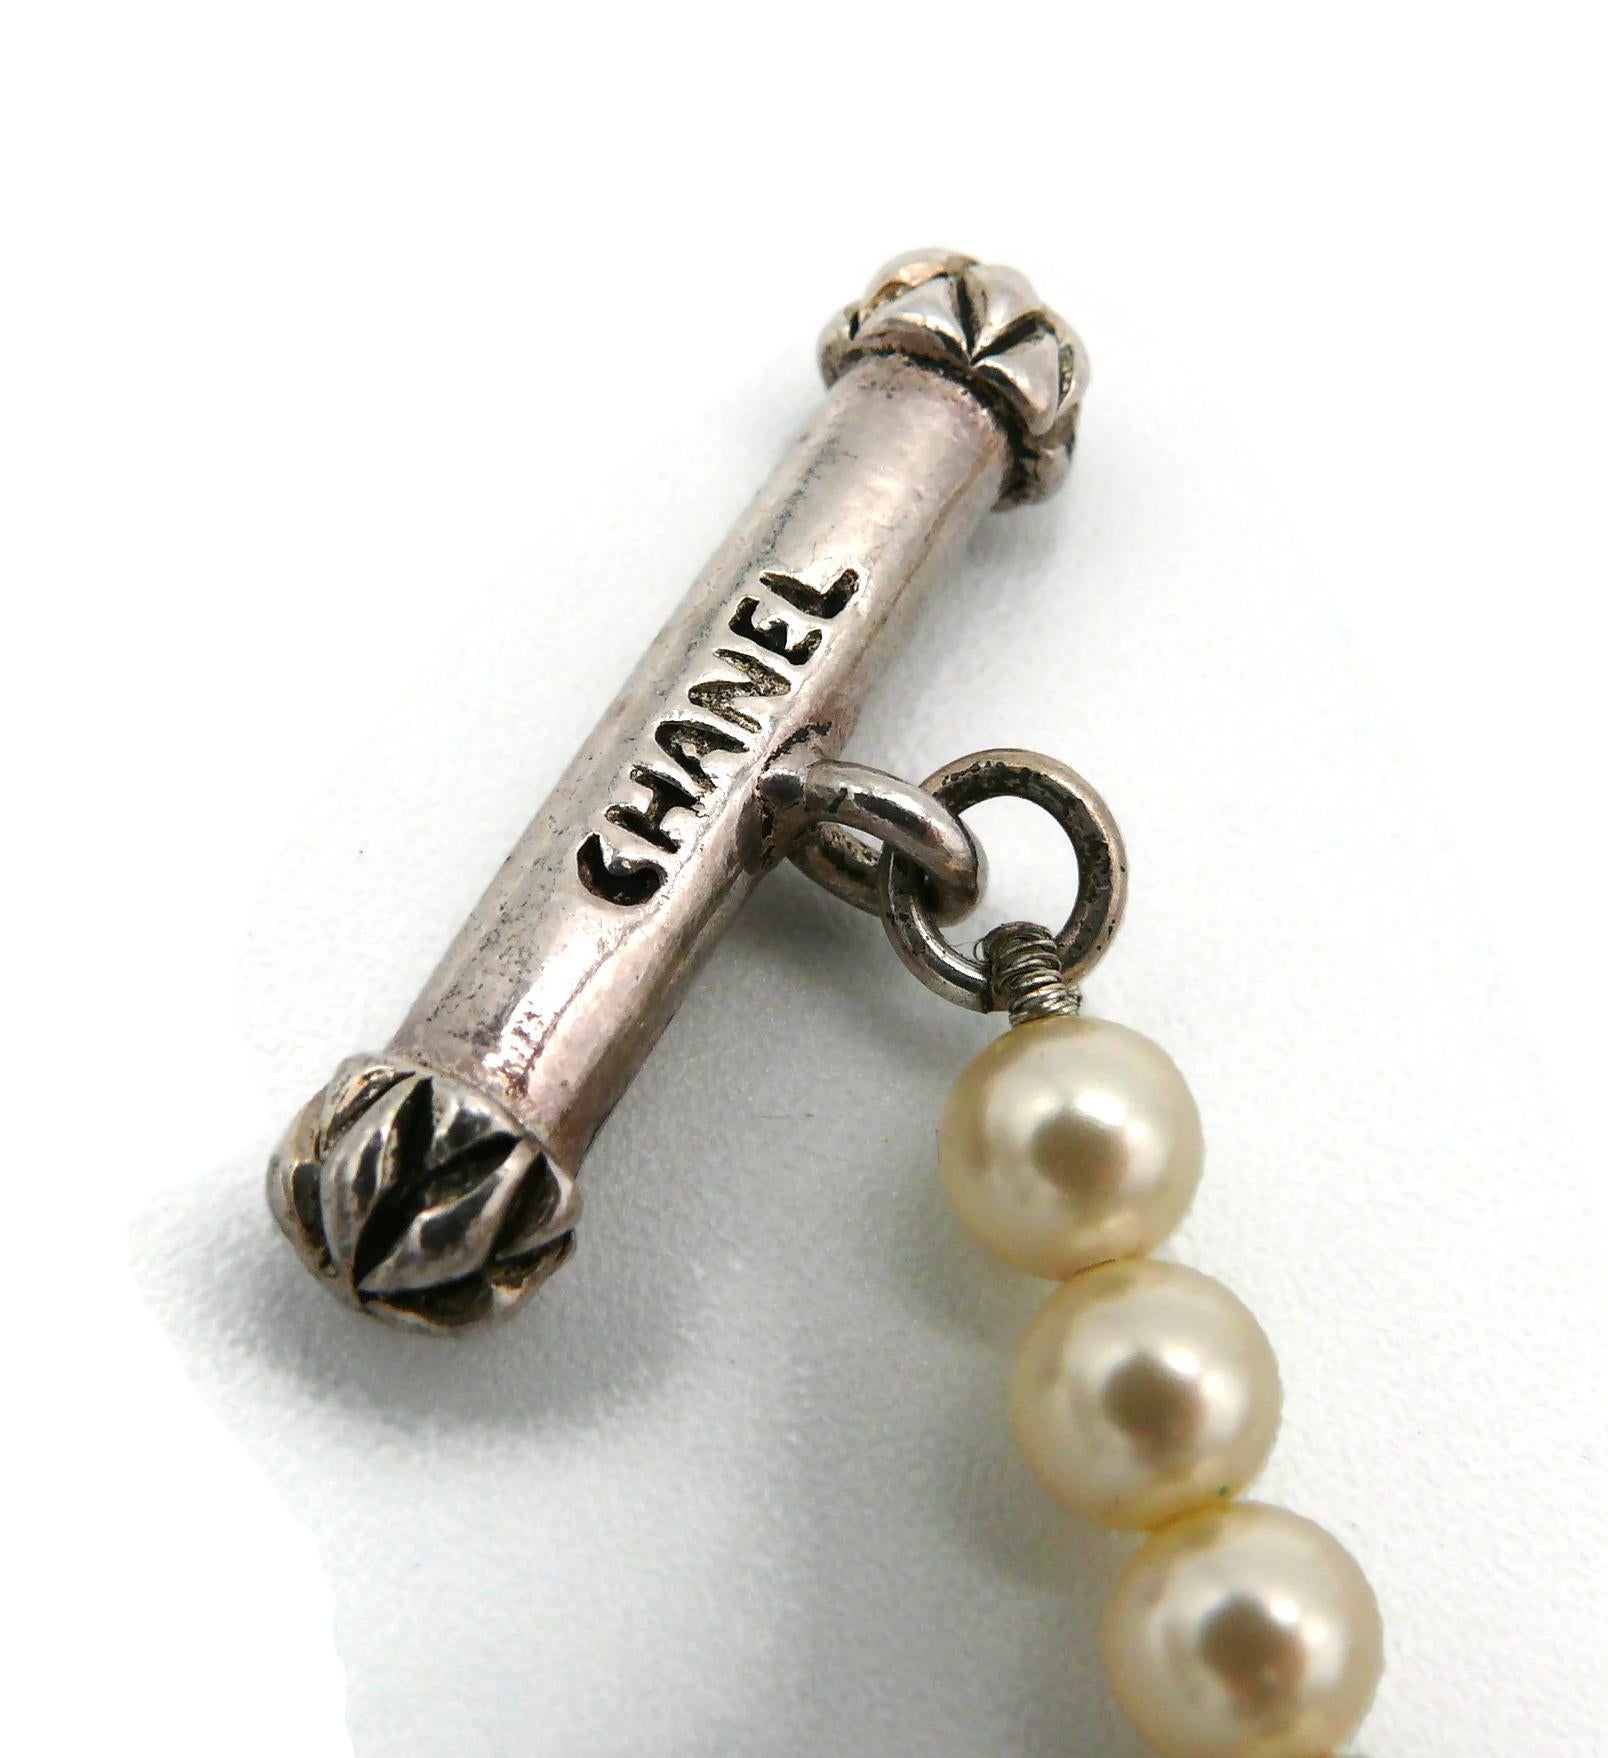 CHANEL by KARL LAGERFELD Vintage Faux Pearl and Crystal Necklace, Fall 1993 For Sale 11